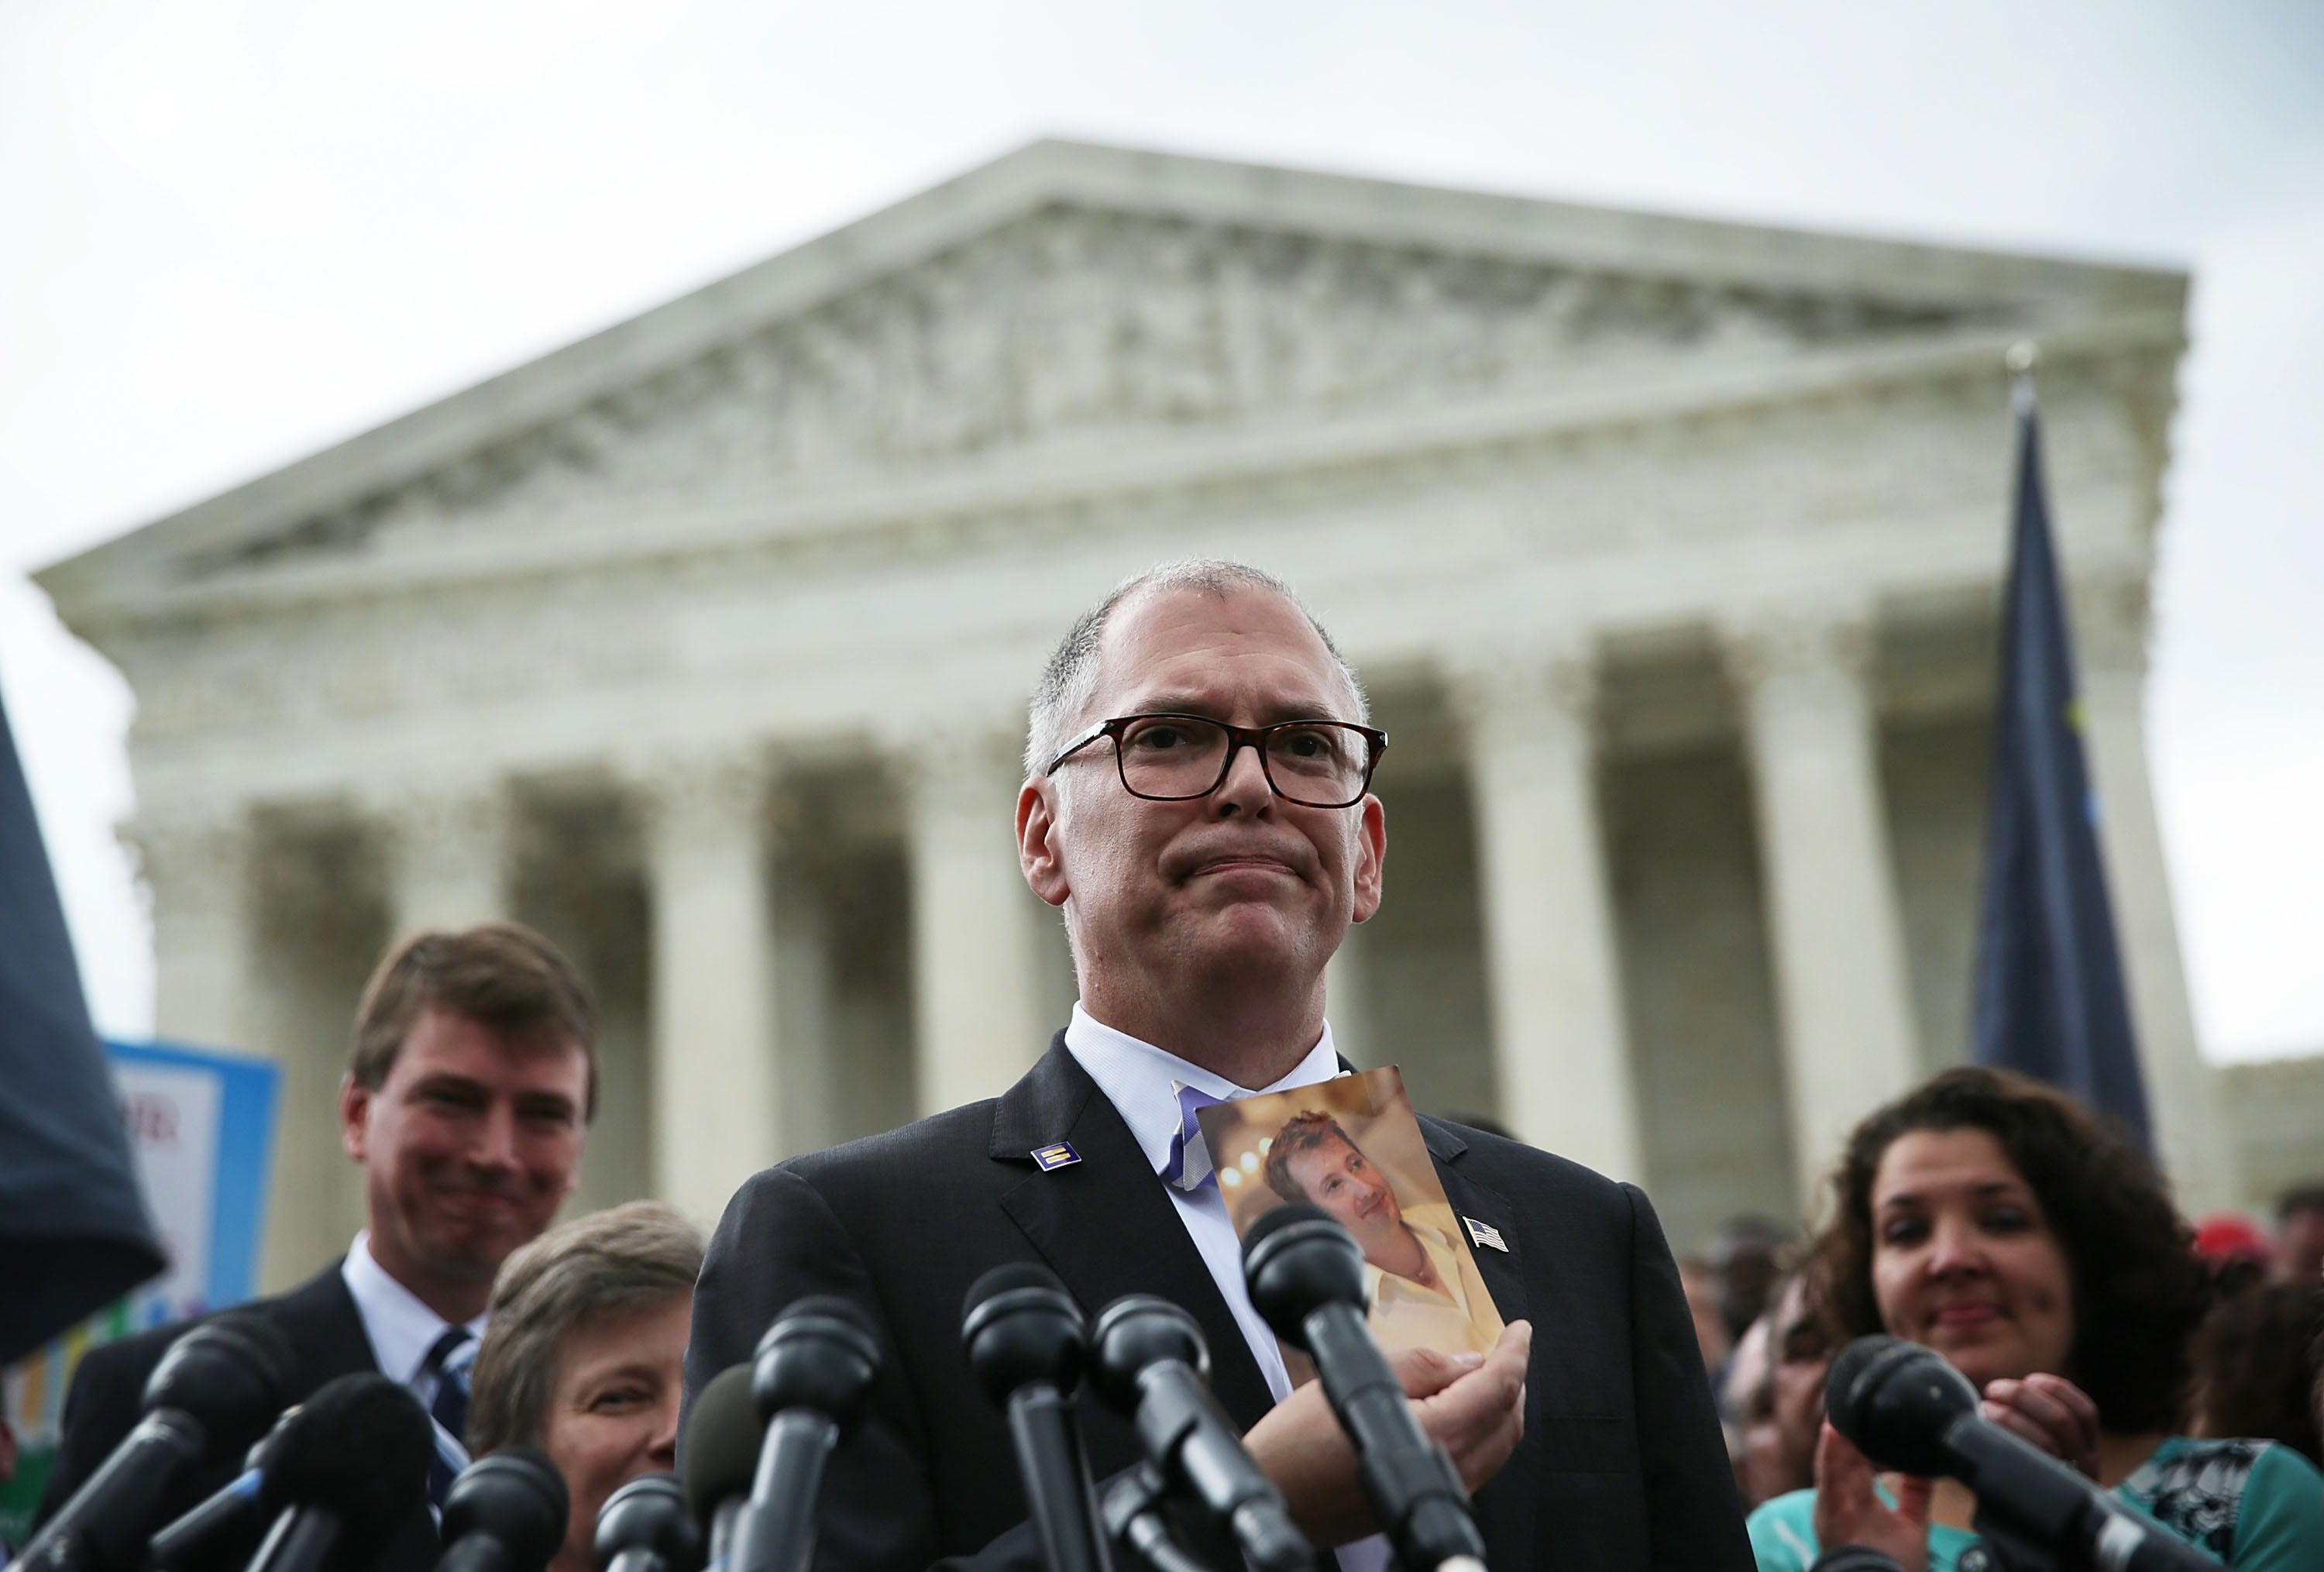 Jim Obergefell’s case led to the legalisation of gay marriage in America